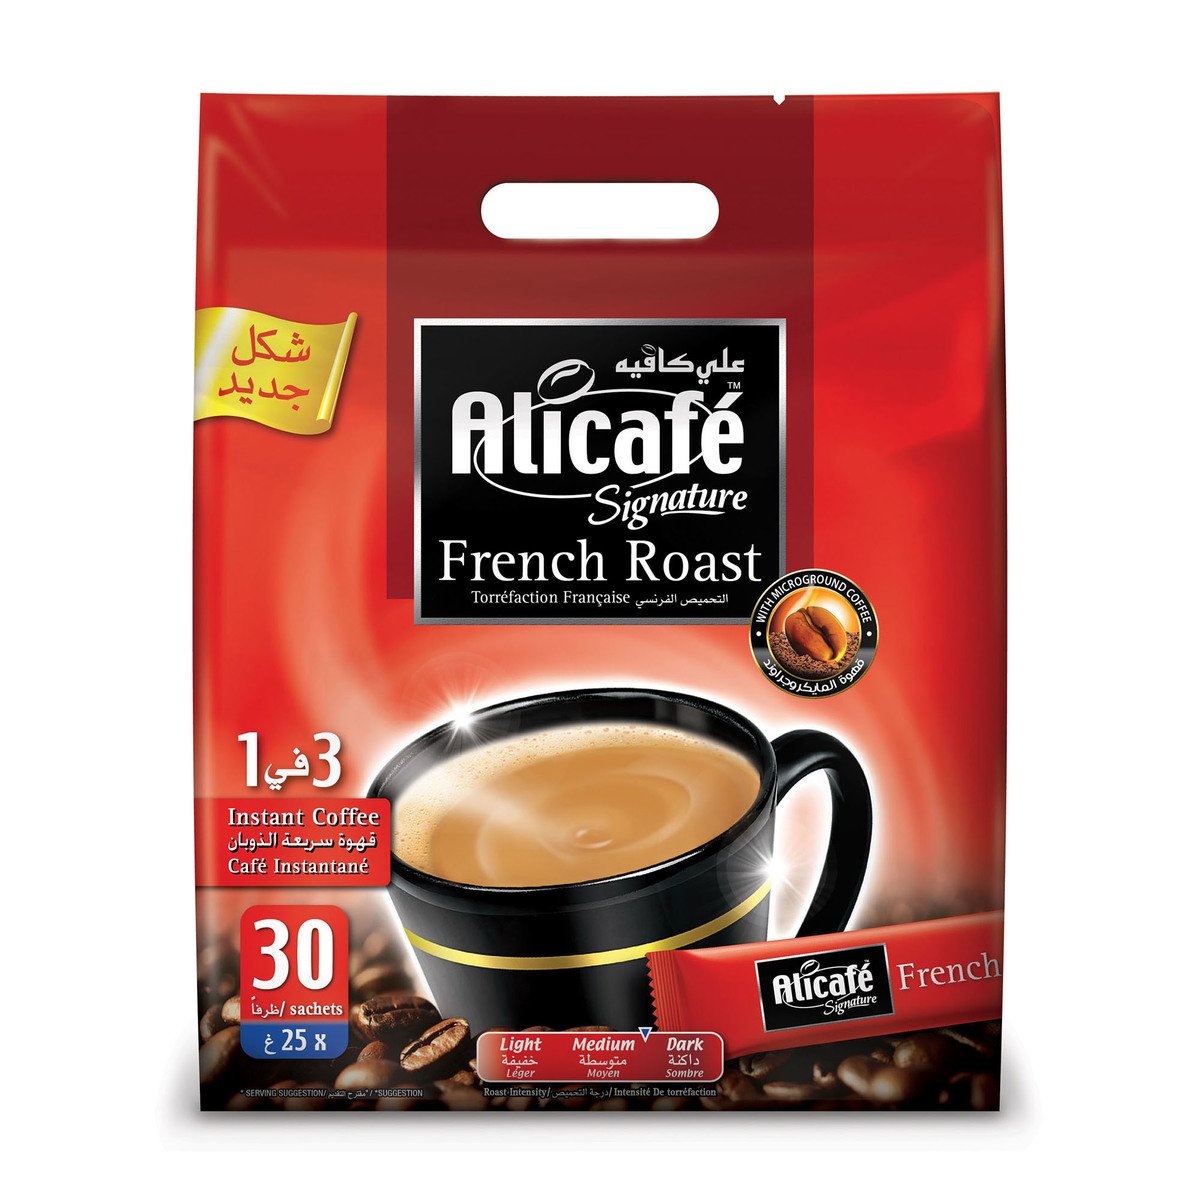 Alicafe Signature 3in1 French Roast Coffee 30 x 25 g